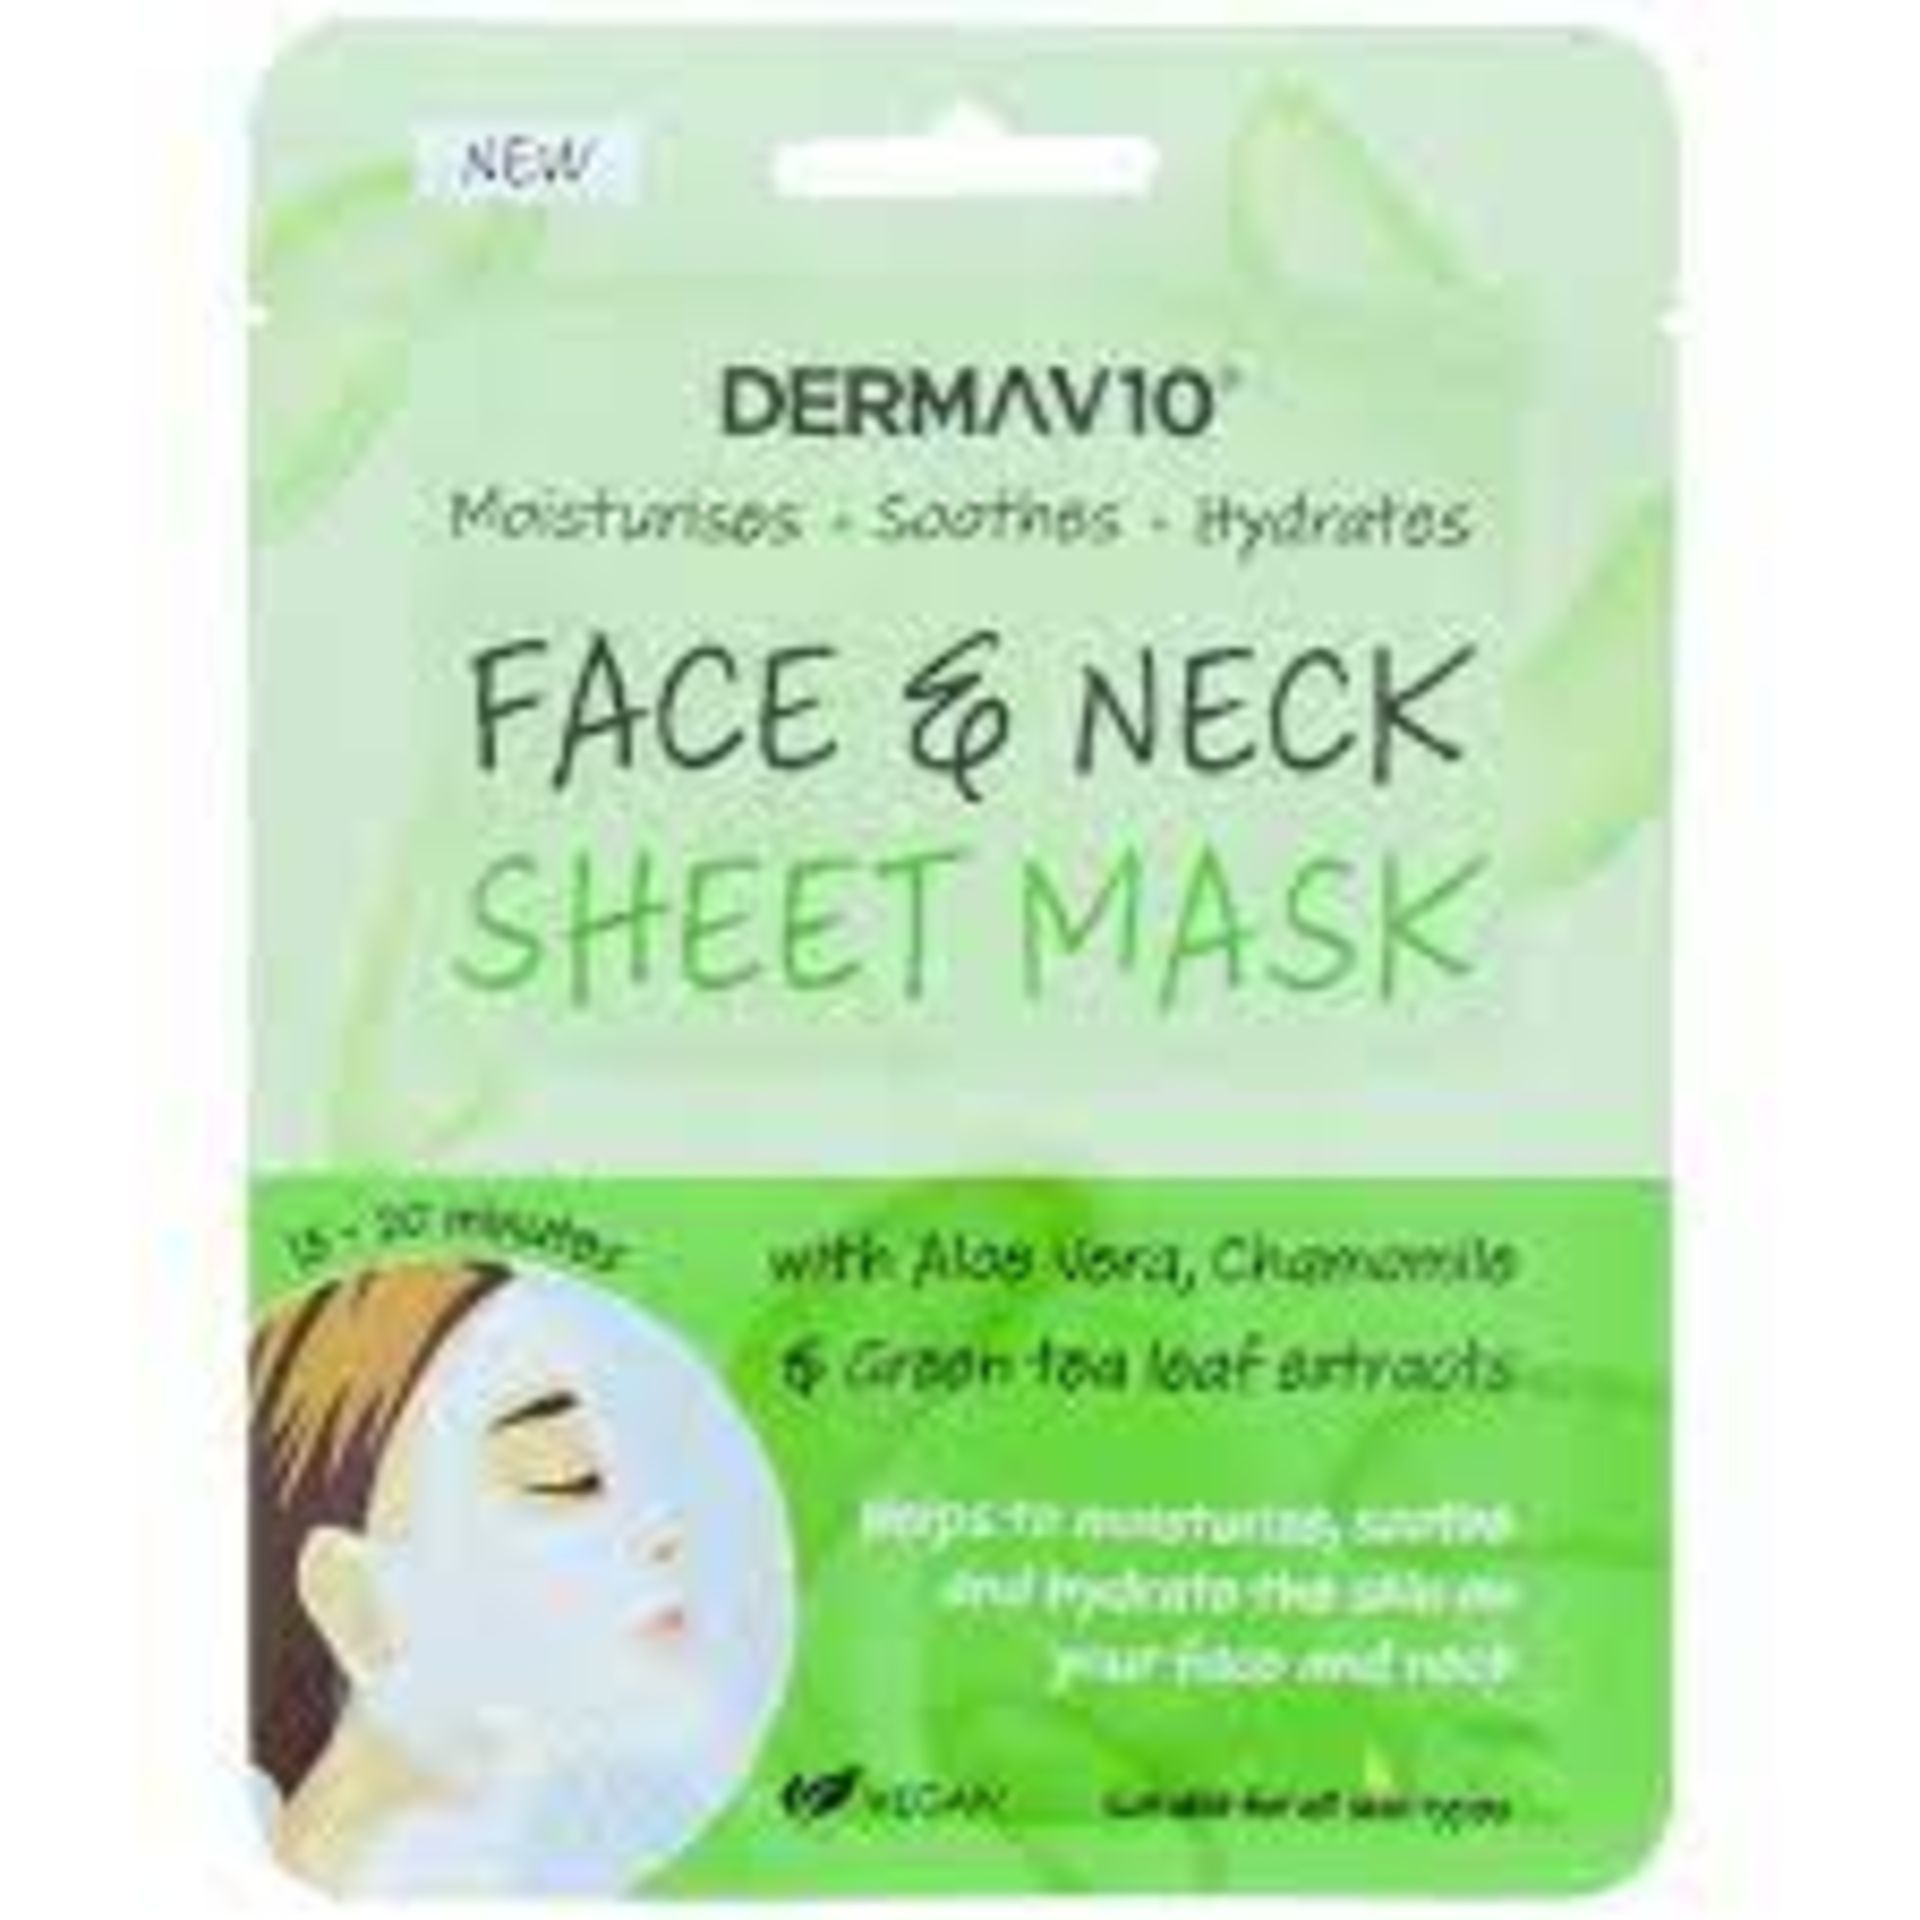 240 x NEW PACKAGED DERMAV10 FACE & NECK SHEET MASKS. MOISTURISES, SOOTHES, HYDRATES. WITH ALOE VERA,